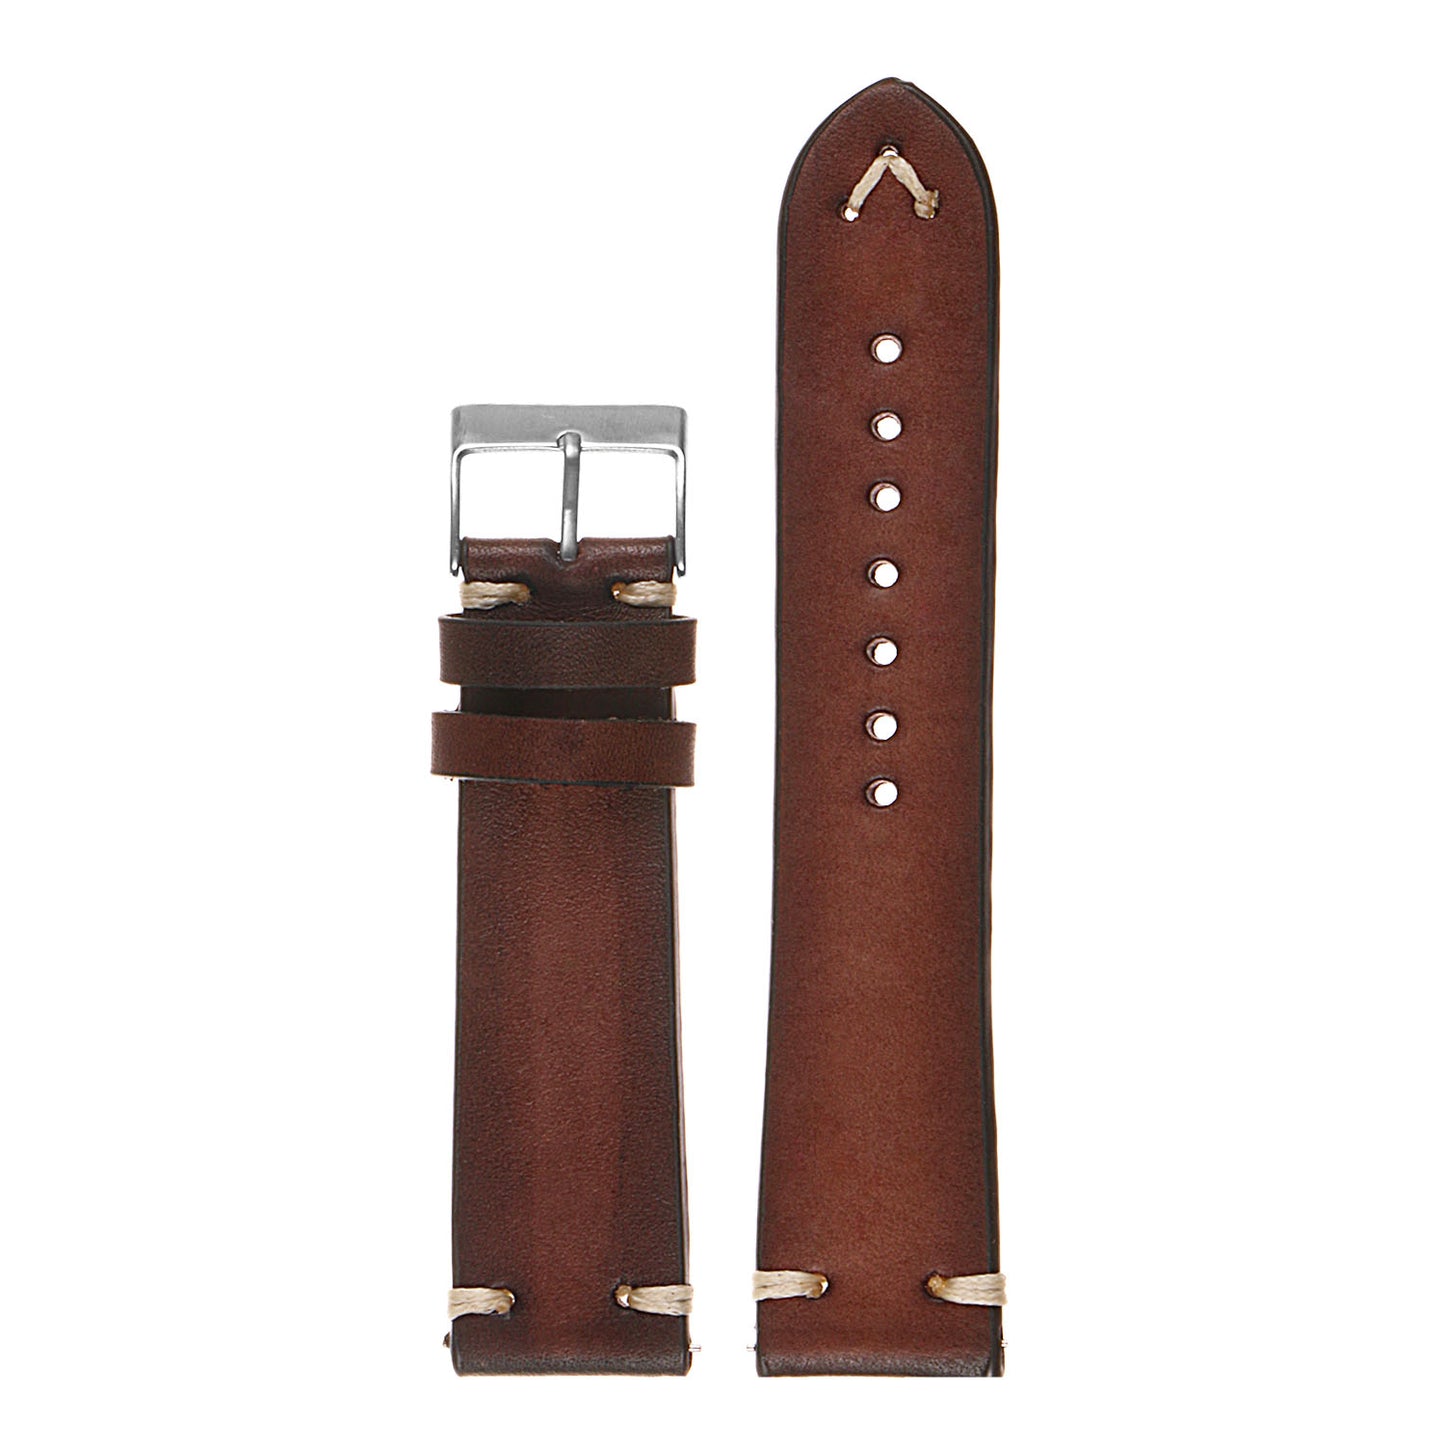 Hand-Stitched Vintage Faded Leather Strap for Garmin Forerunner 745